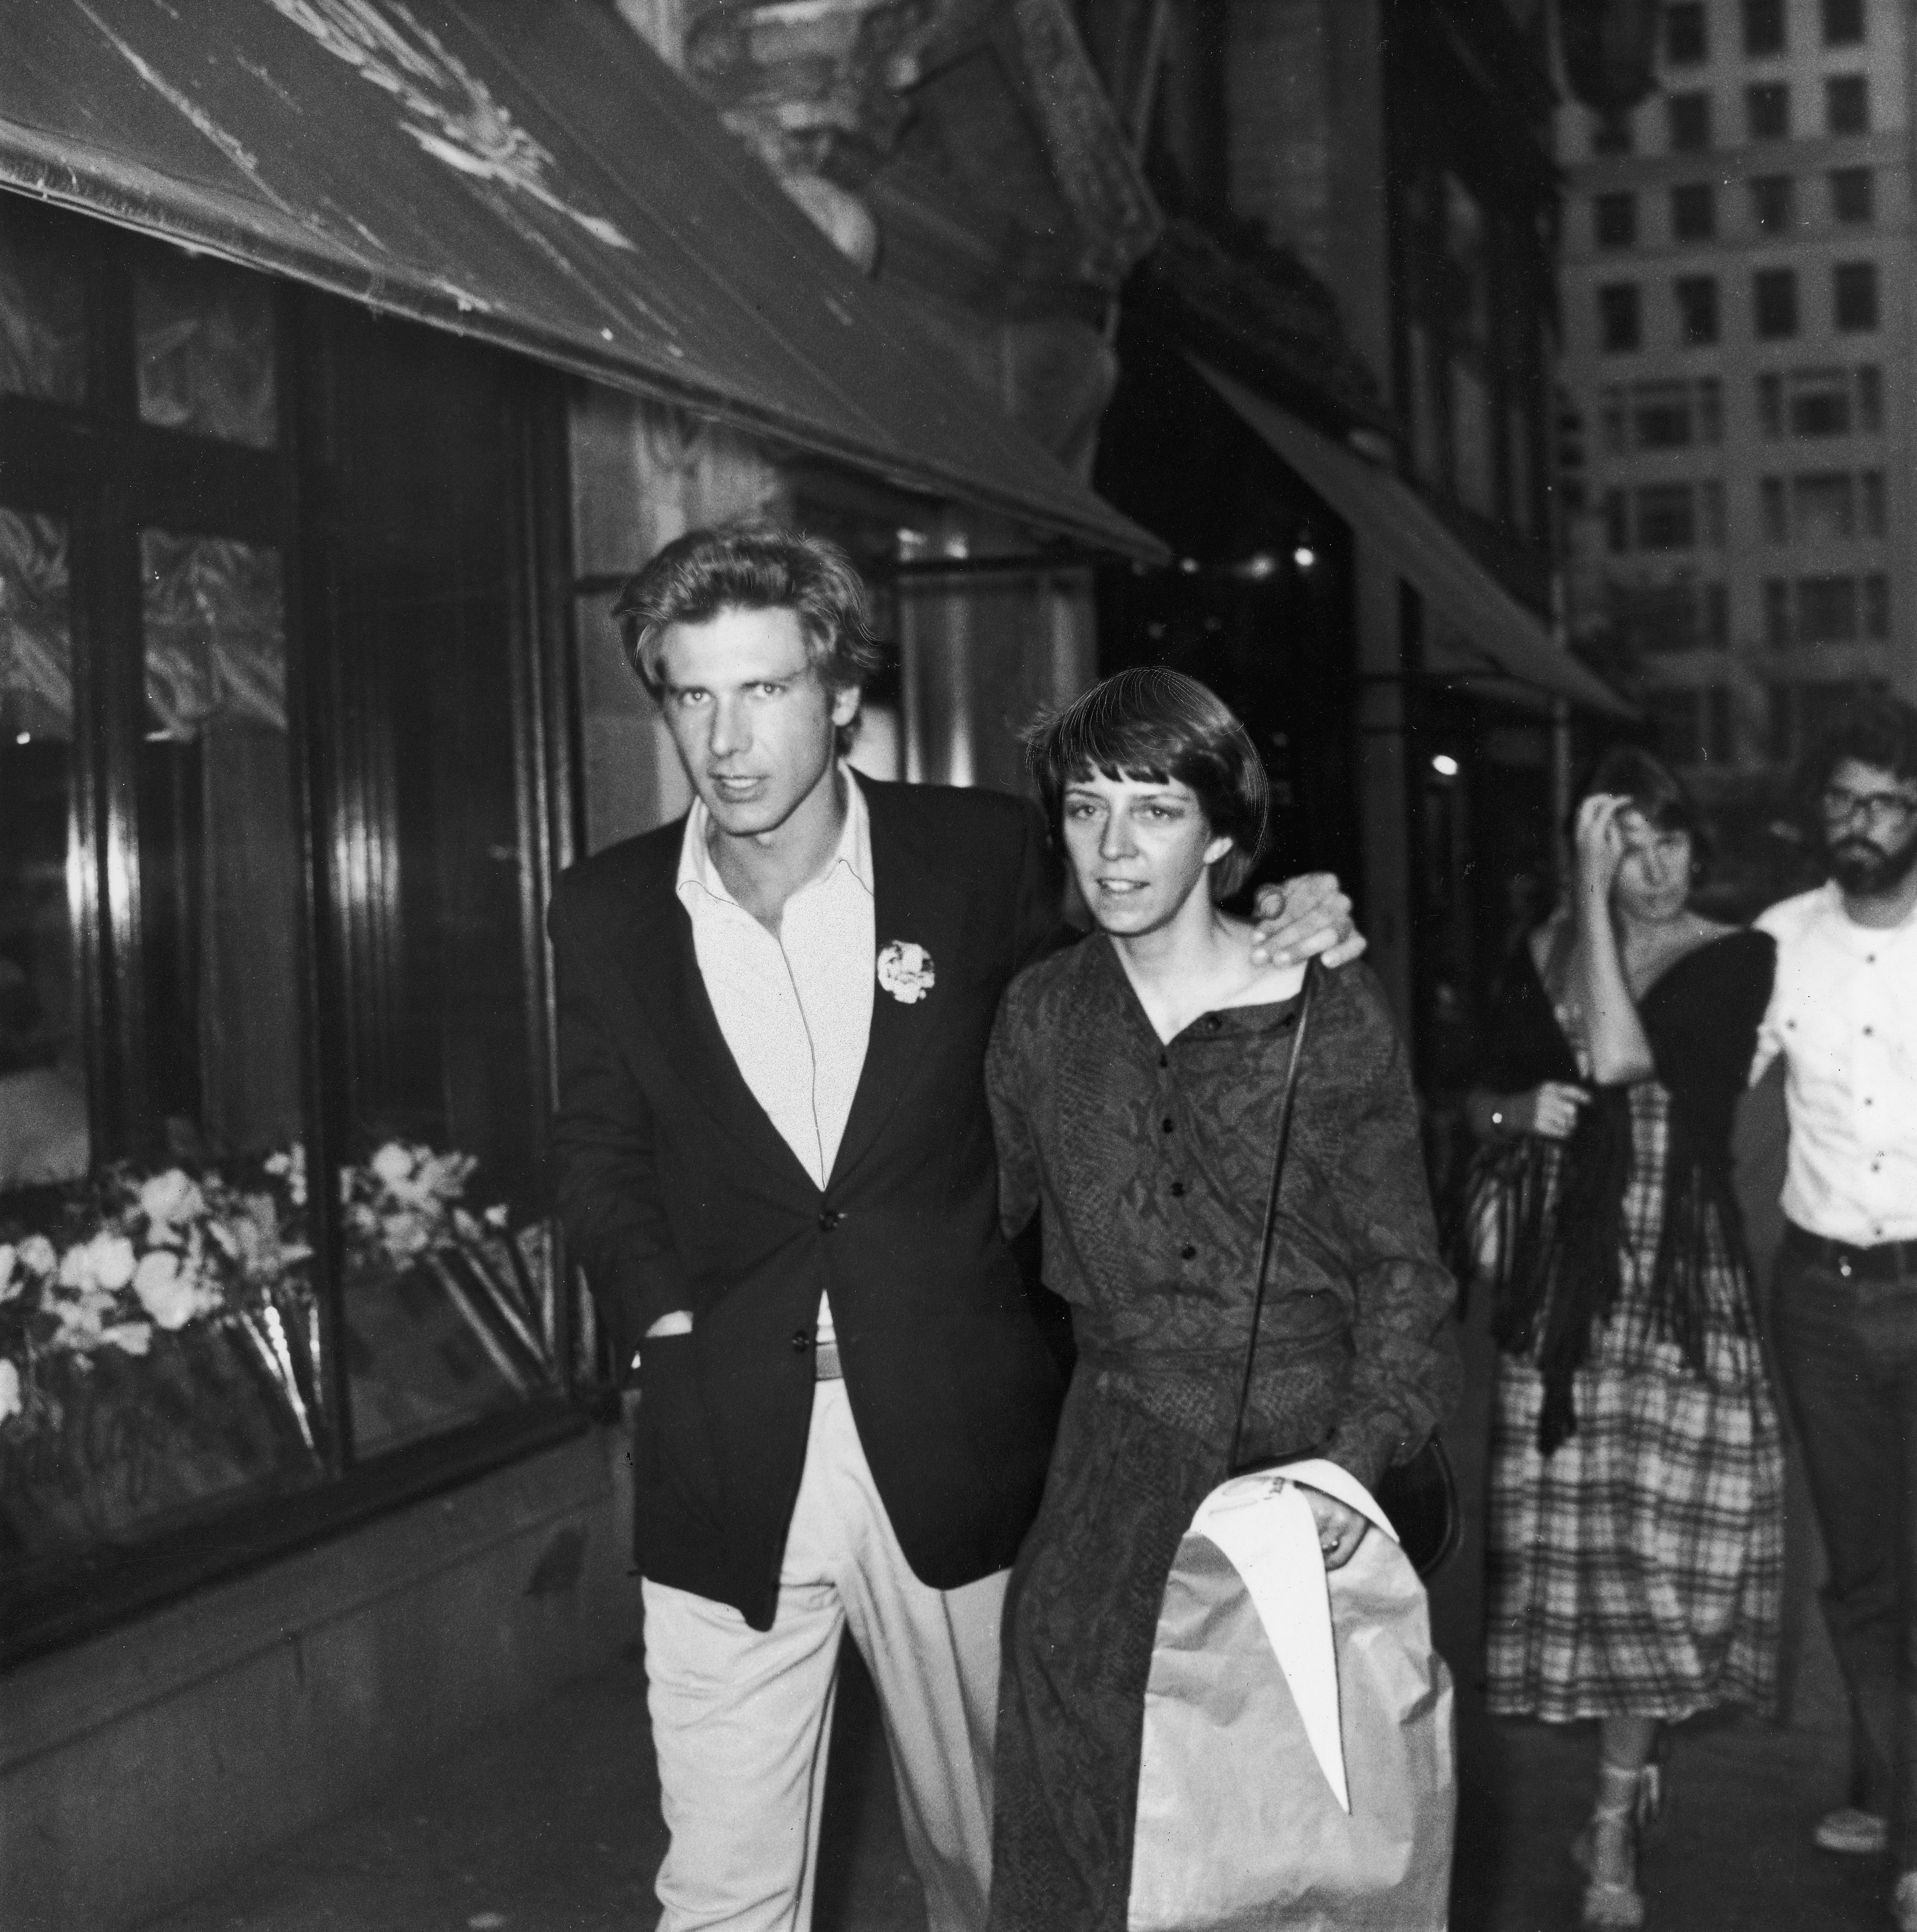 Harrison Ford and Mary Marquardt walking in New York City in June 1977. | Source: Frank Edwards/Fotos International/Getty Images